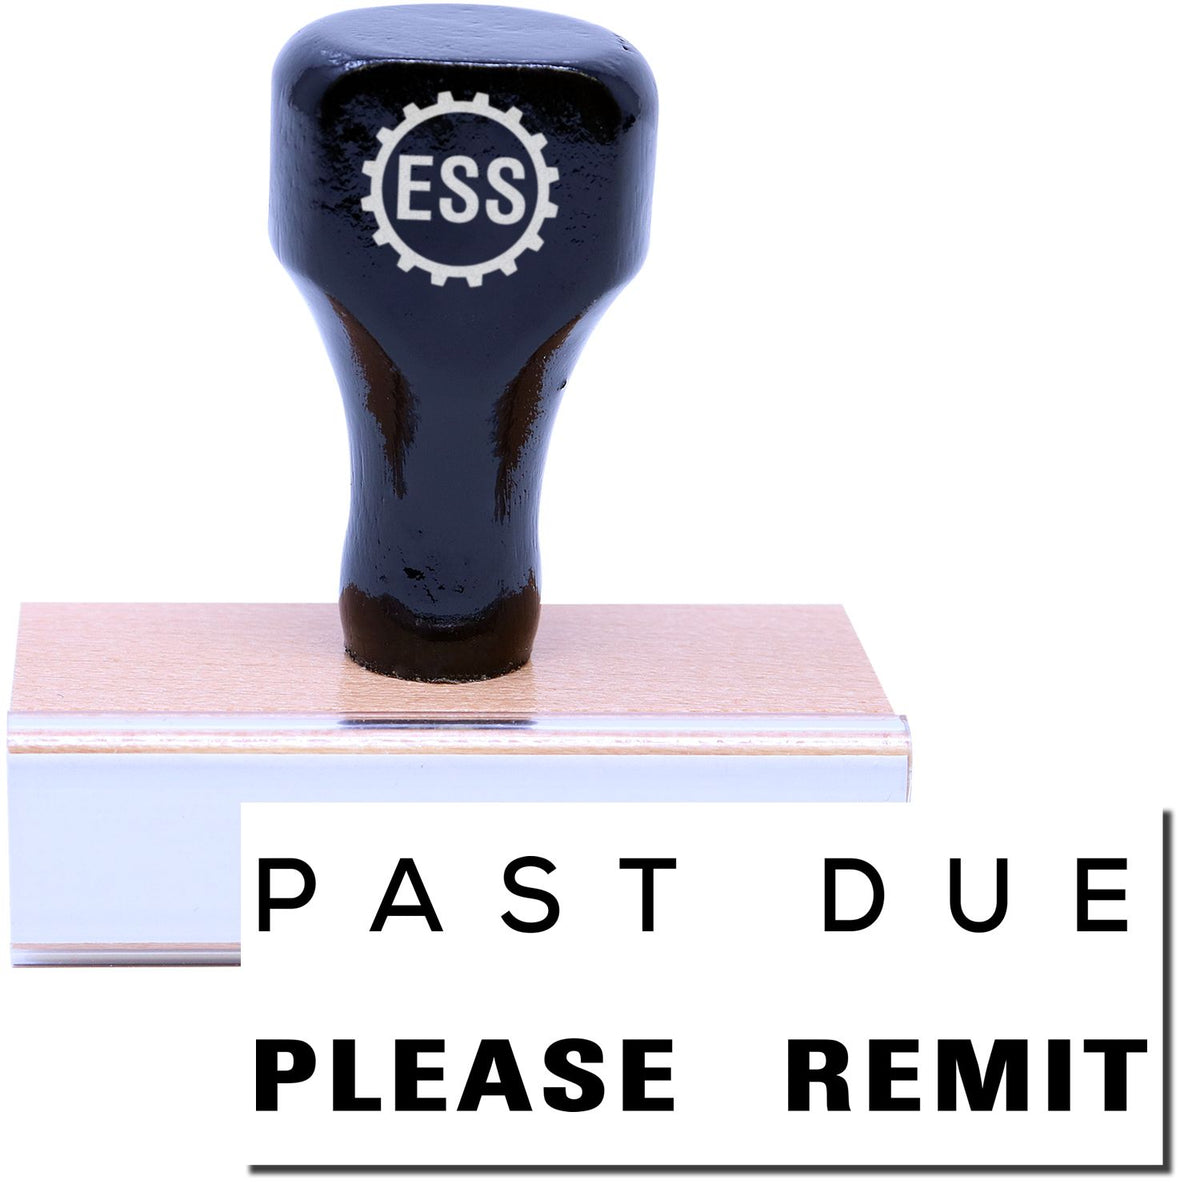 Past Due Please Remit Rubber Stamp